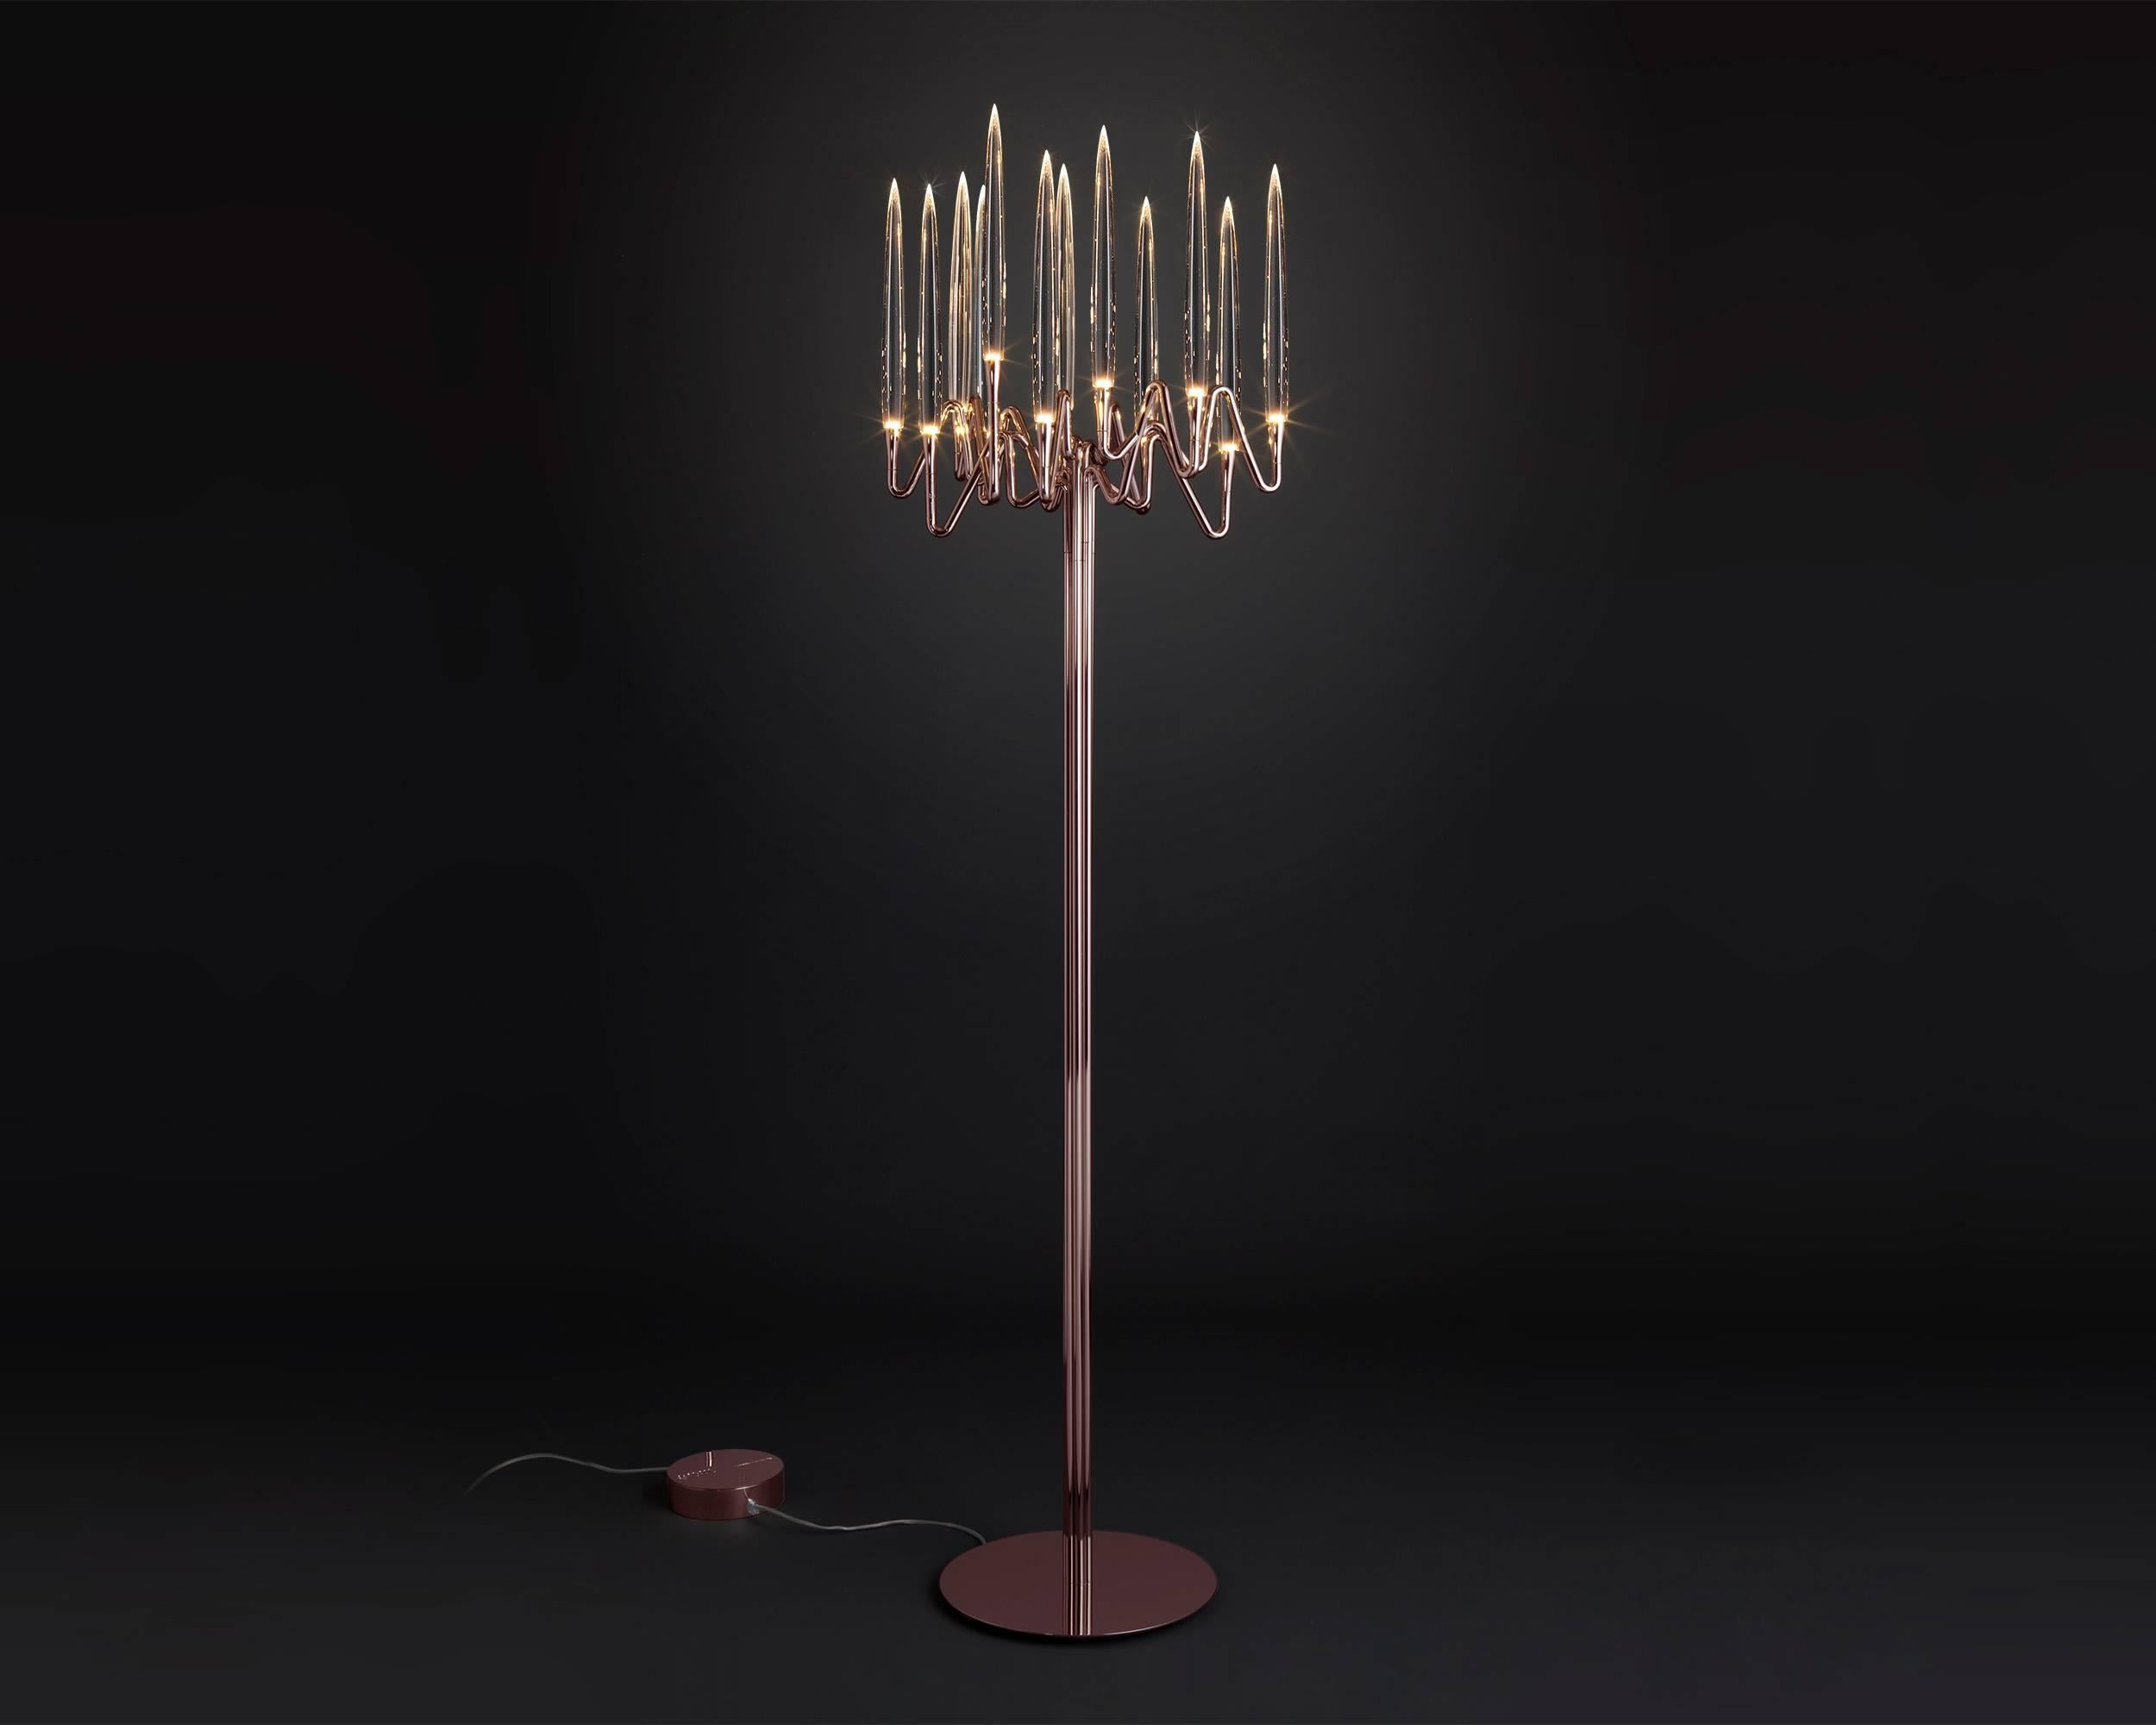 Inspired by Arabic calligraphic art and the icon of the classical candelabrum is Il Pezzo 3 Floor Lamp, with a hand-forged brass structure and elegant “candles” crafted from solid crystal.
The candles are illuminated using the latest LED